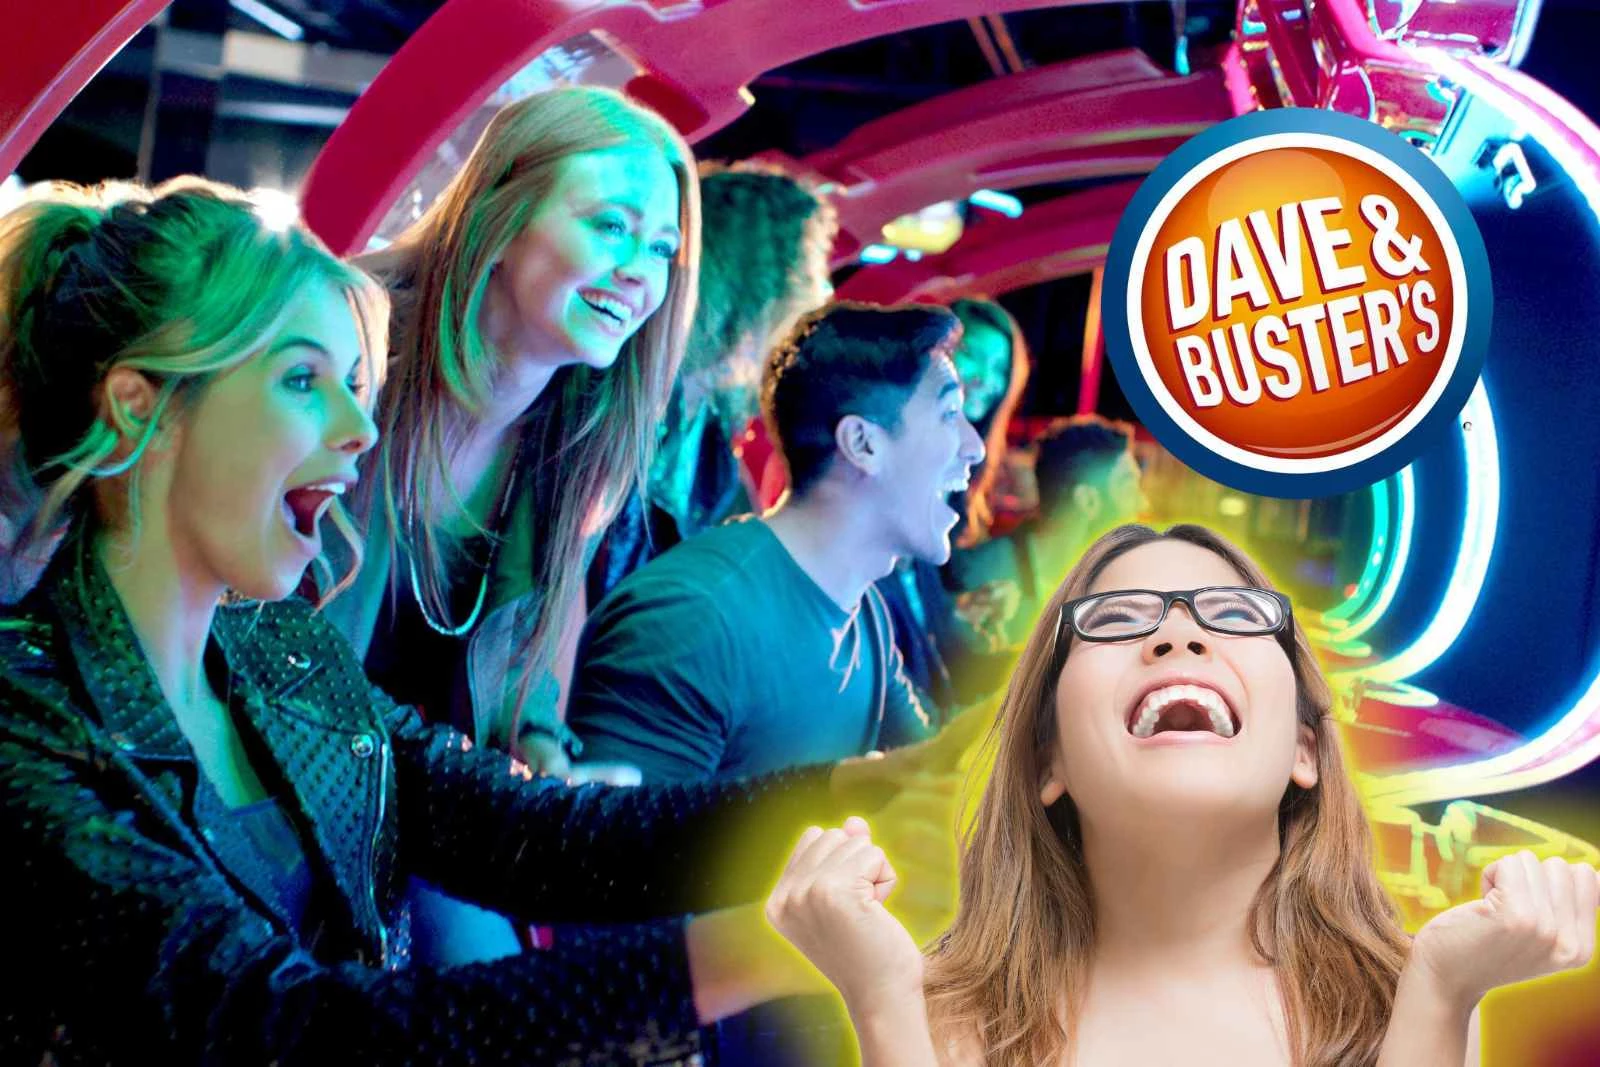 New Dave & Buster's coming soon to Colorado Springs